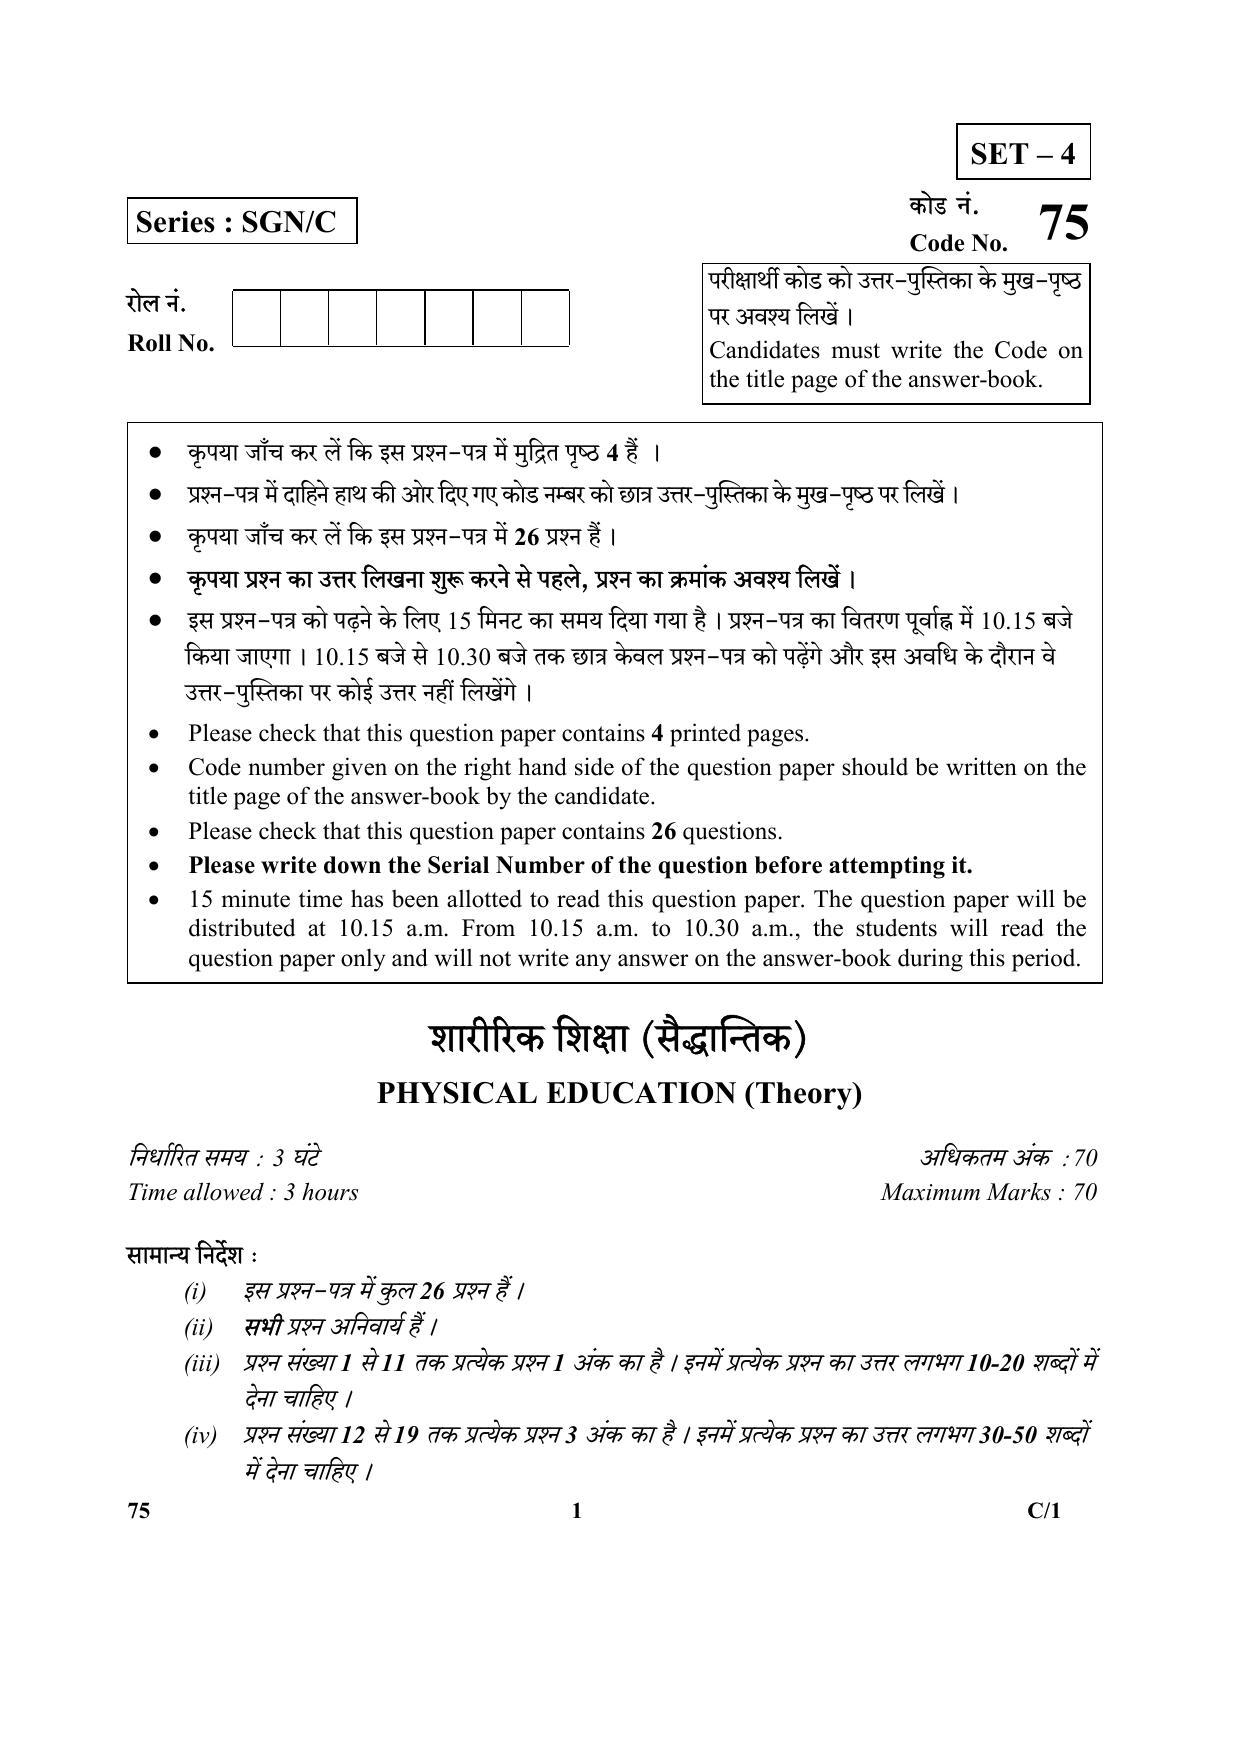 CBSE Class 12 75 (Physical Education) 2018 Compartment Question Paper - Page 1